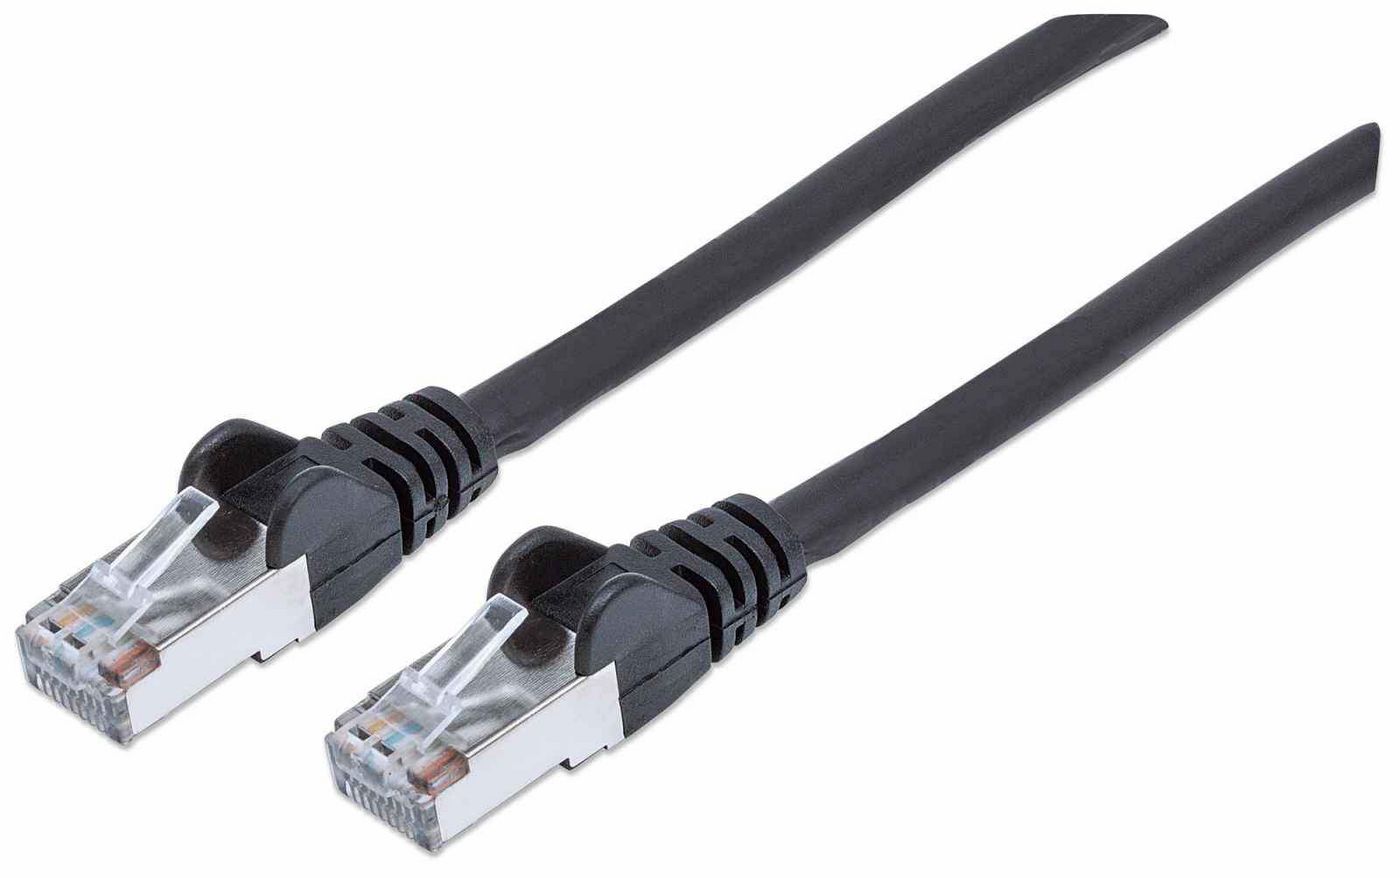 Intellinet 741101 High Performance Network Cable 